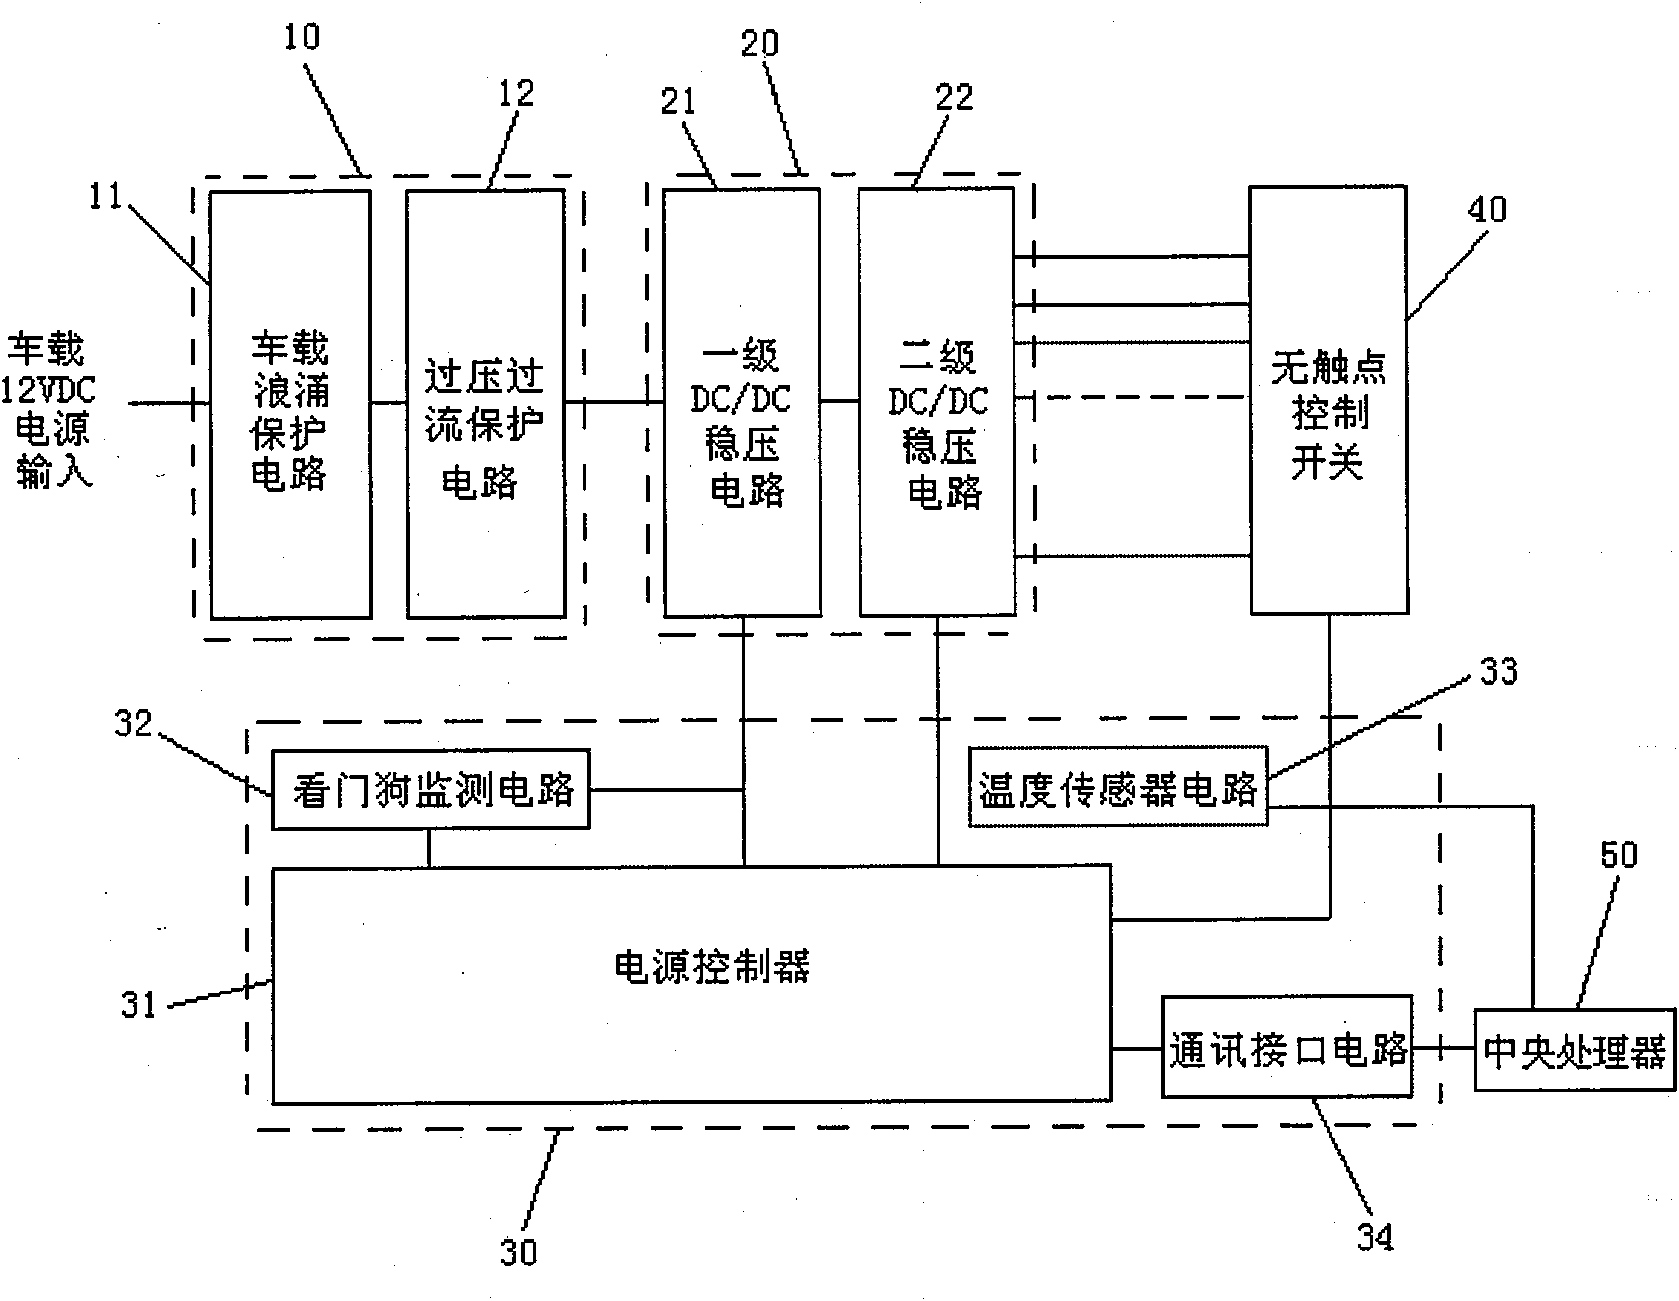 Power system of vehicular interaction device